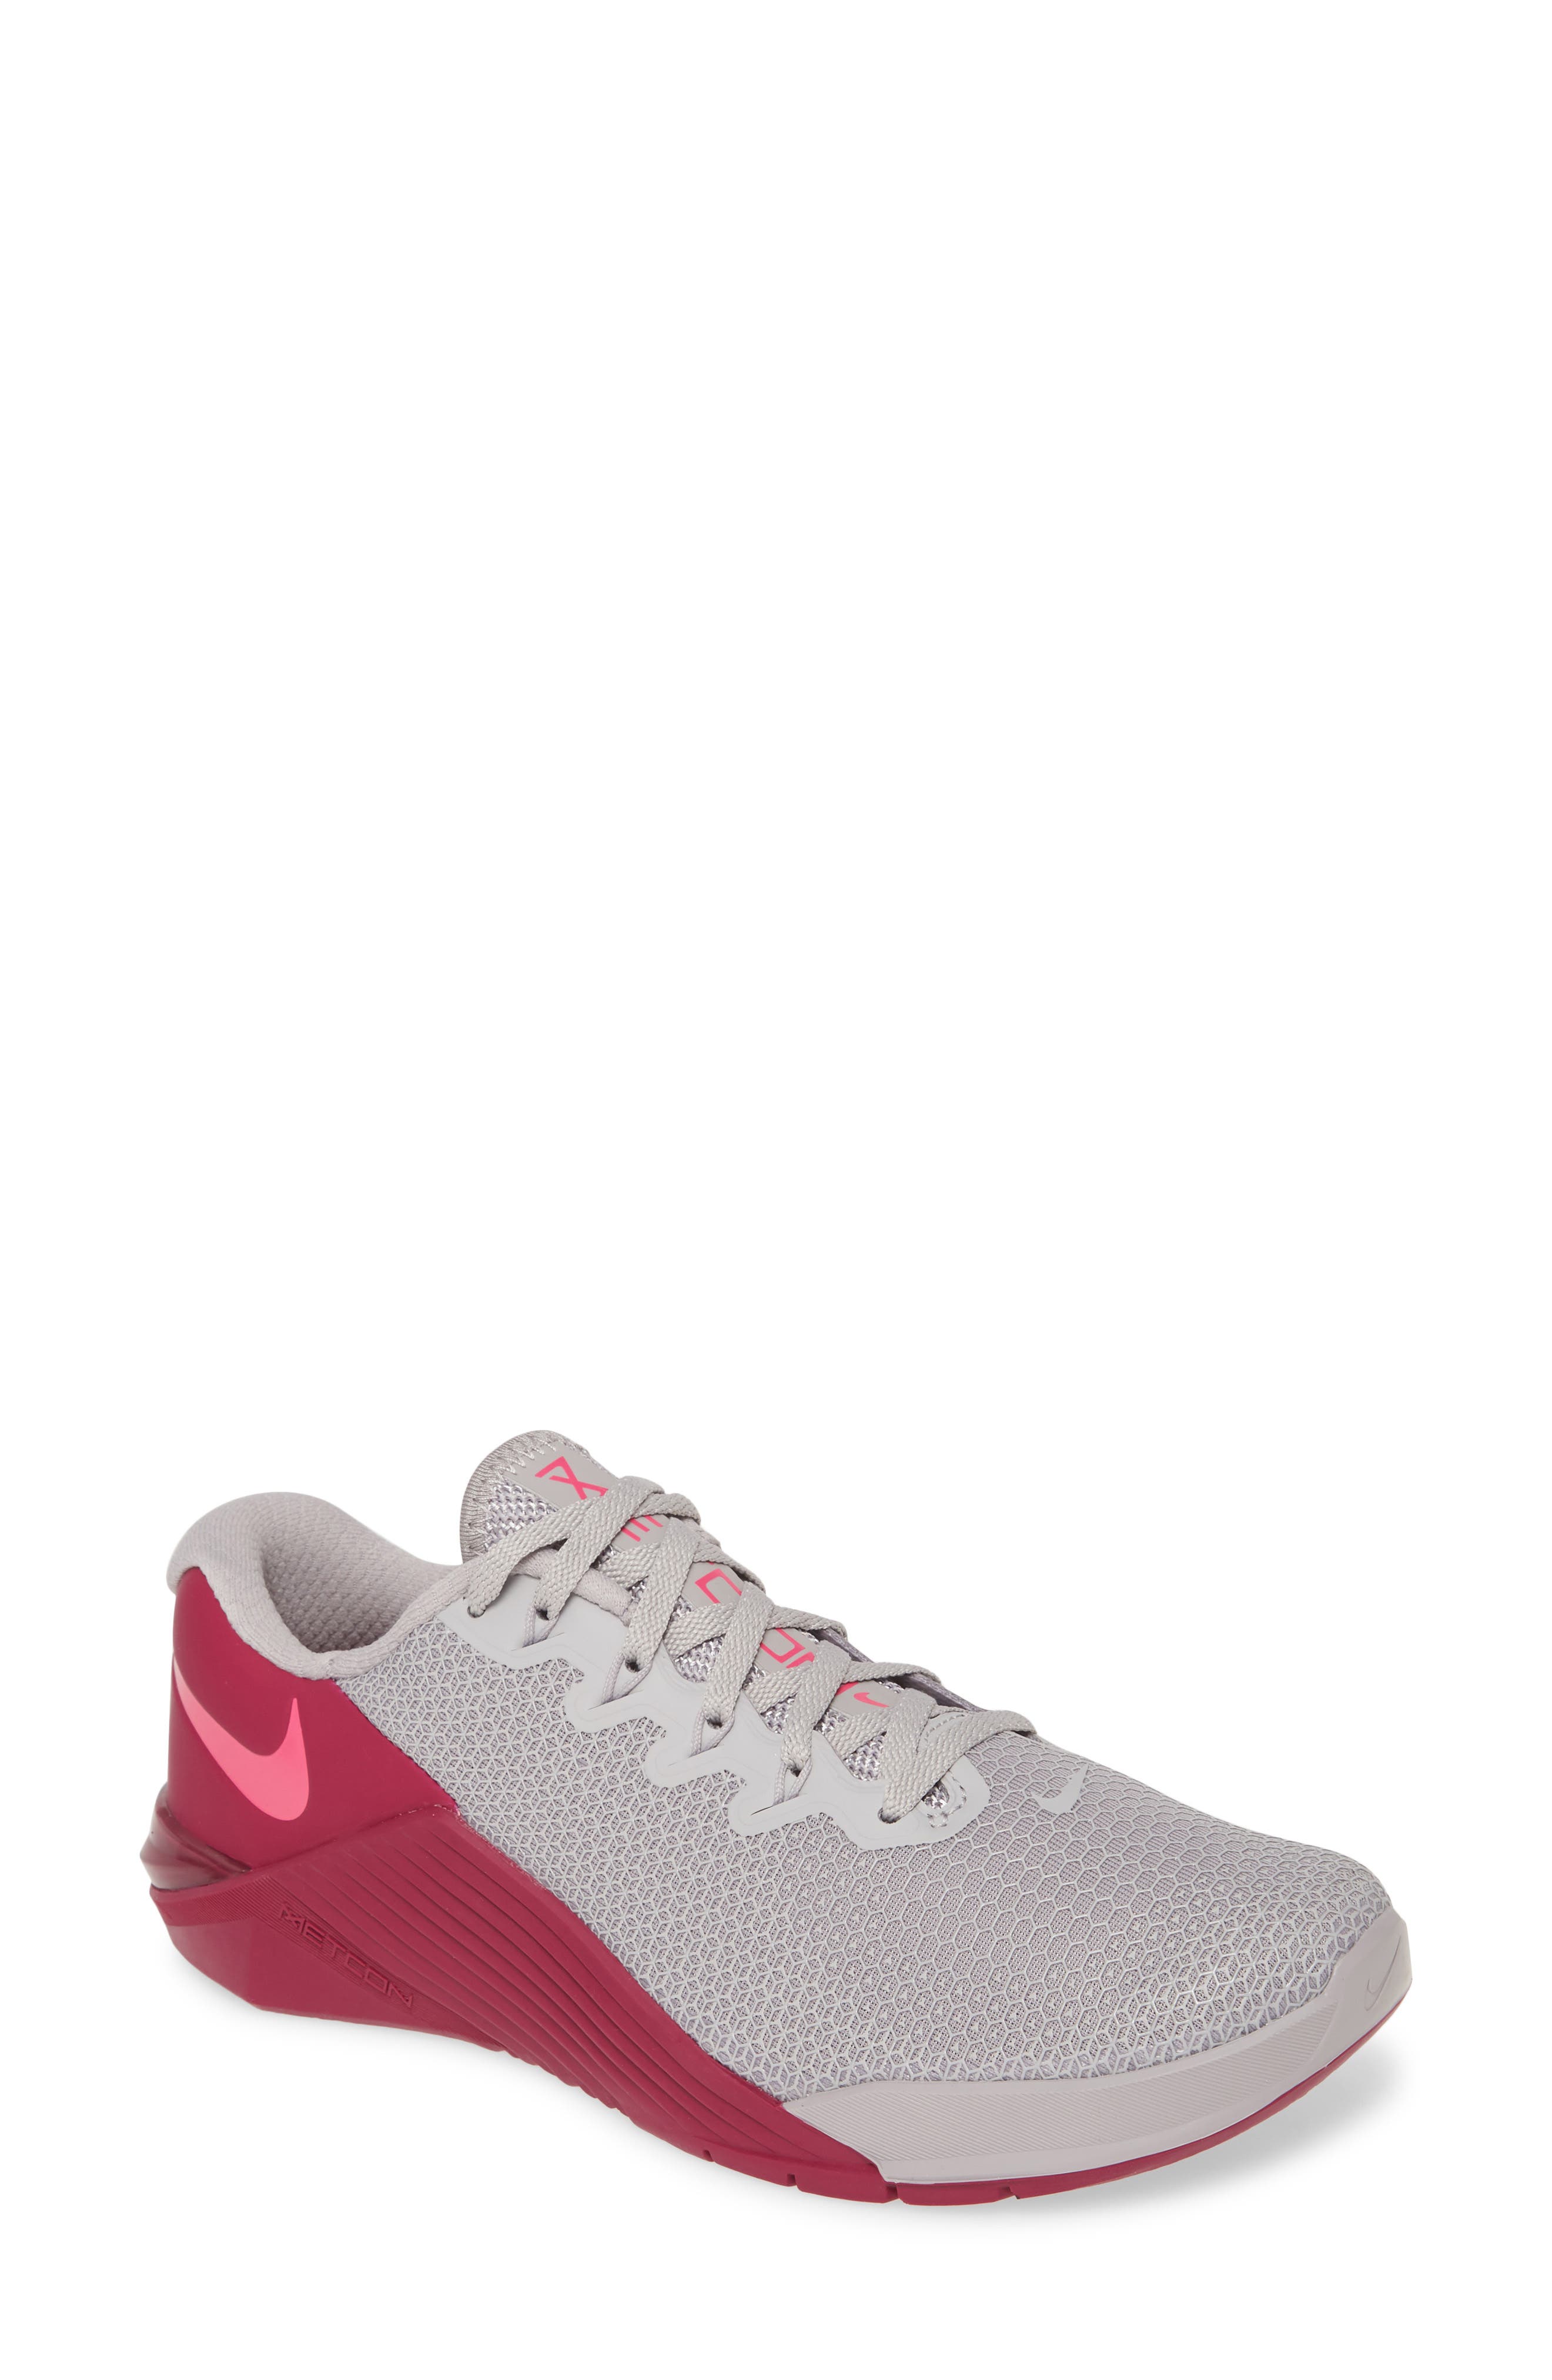 nike metcon 5 grey and pink